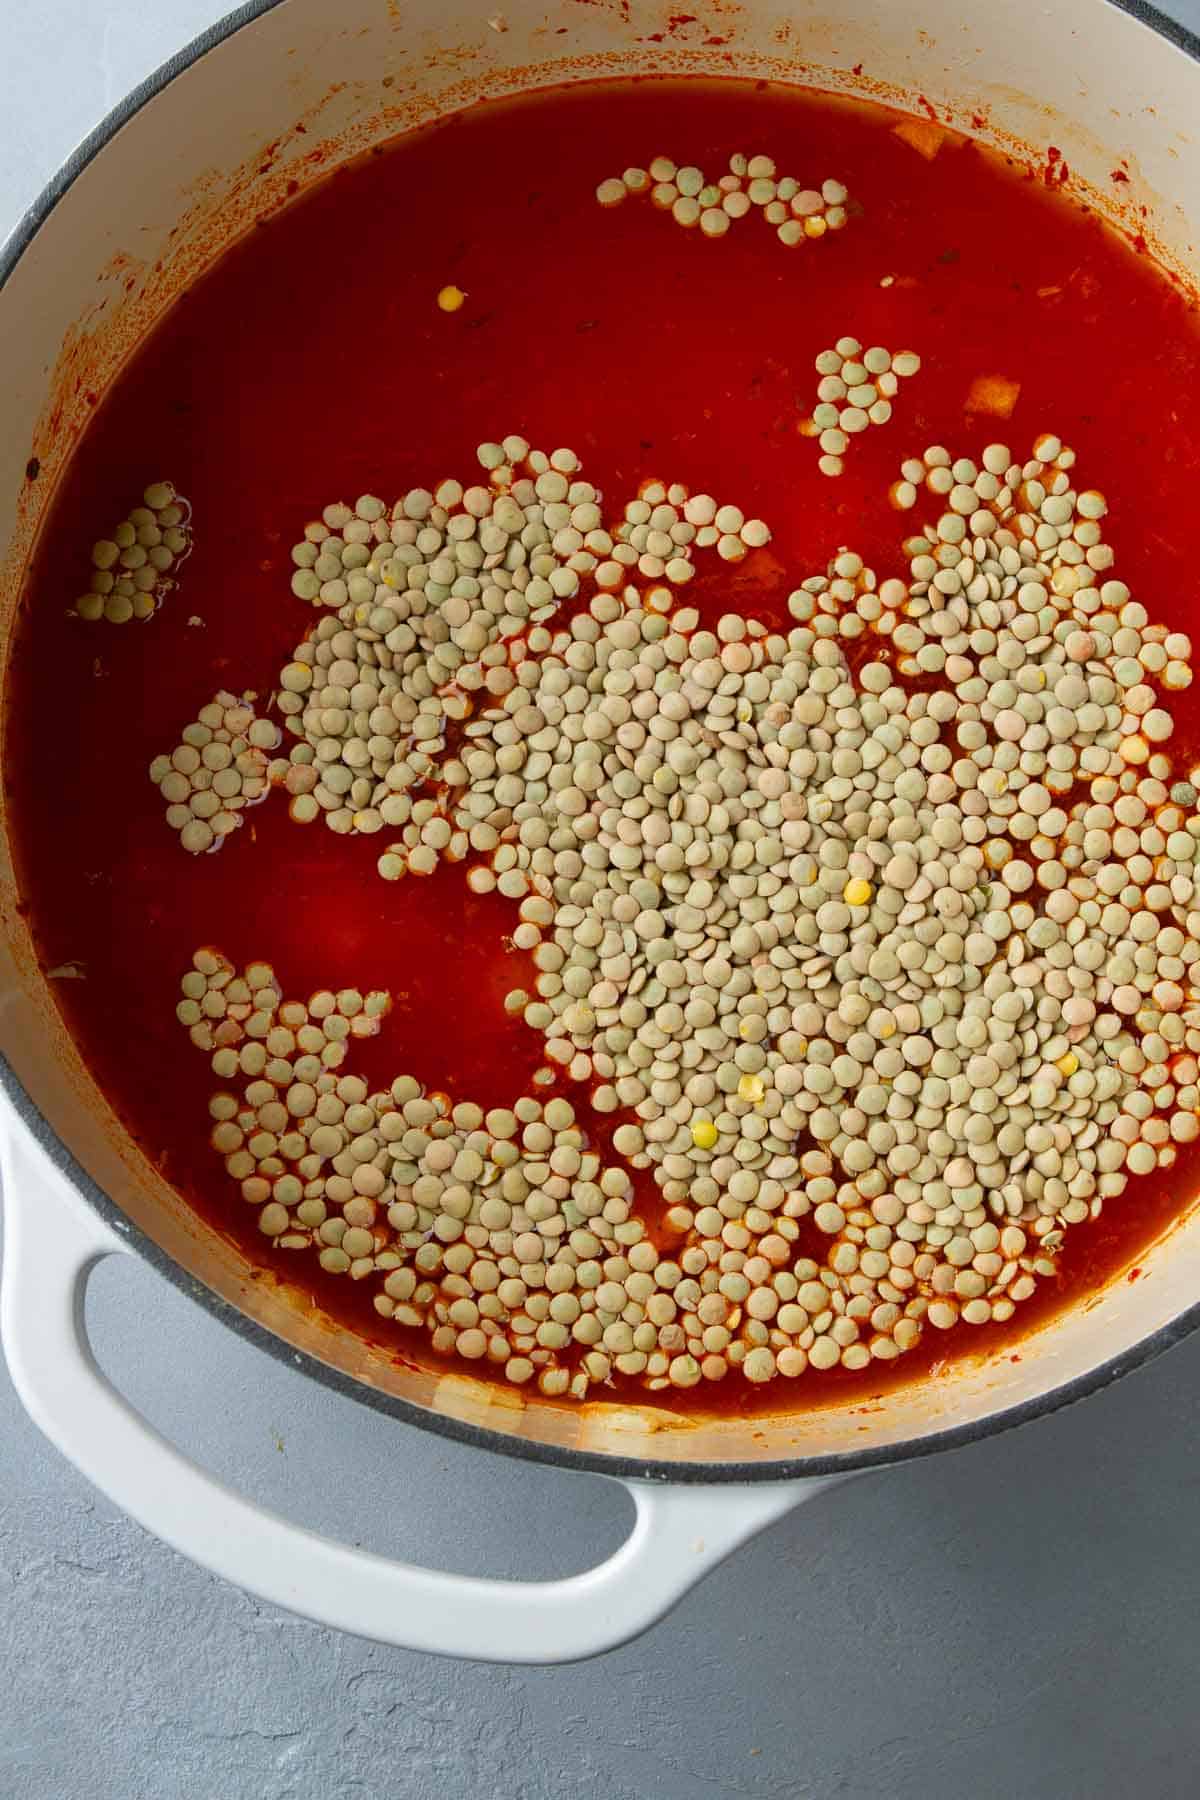 Uncooked lentils floating on the surface of vegetable broth in a large saucepan.